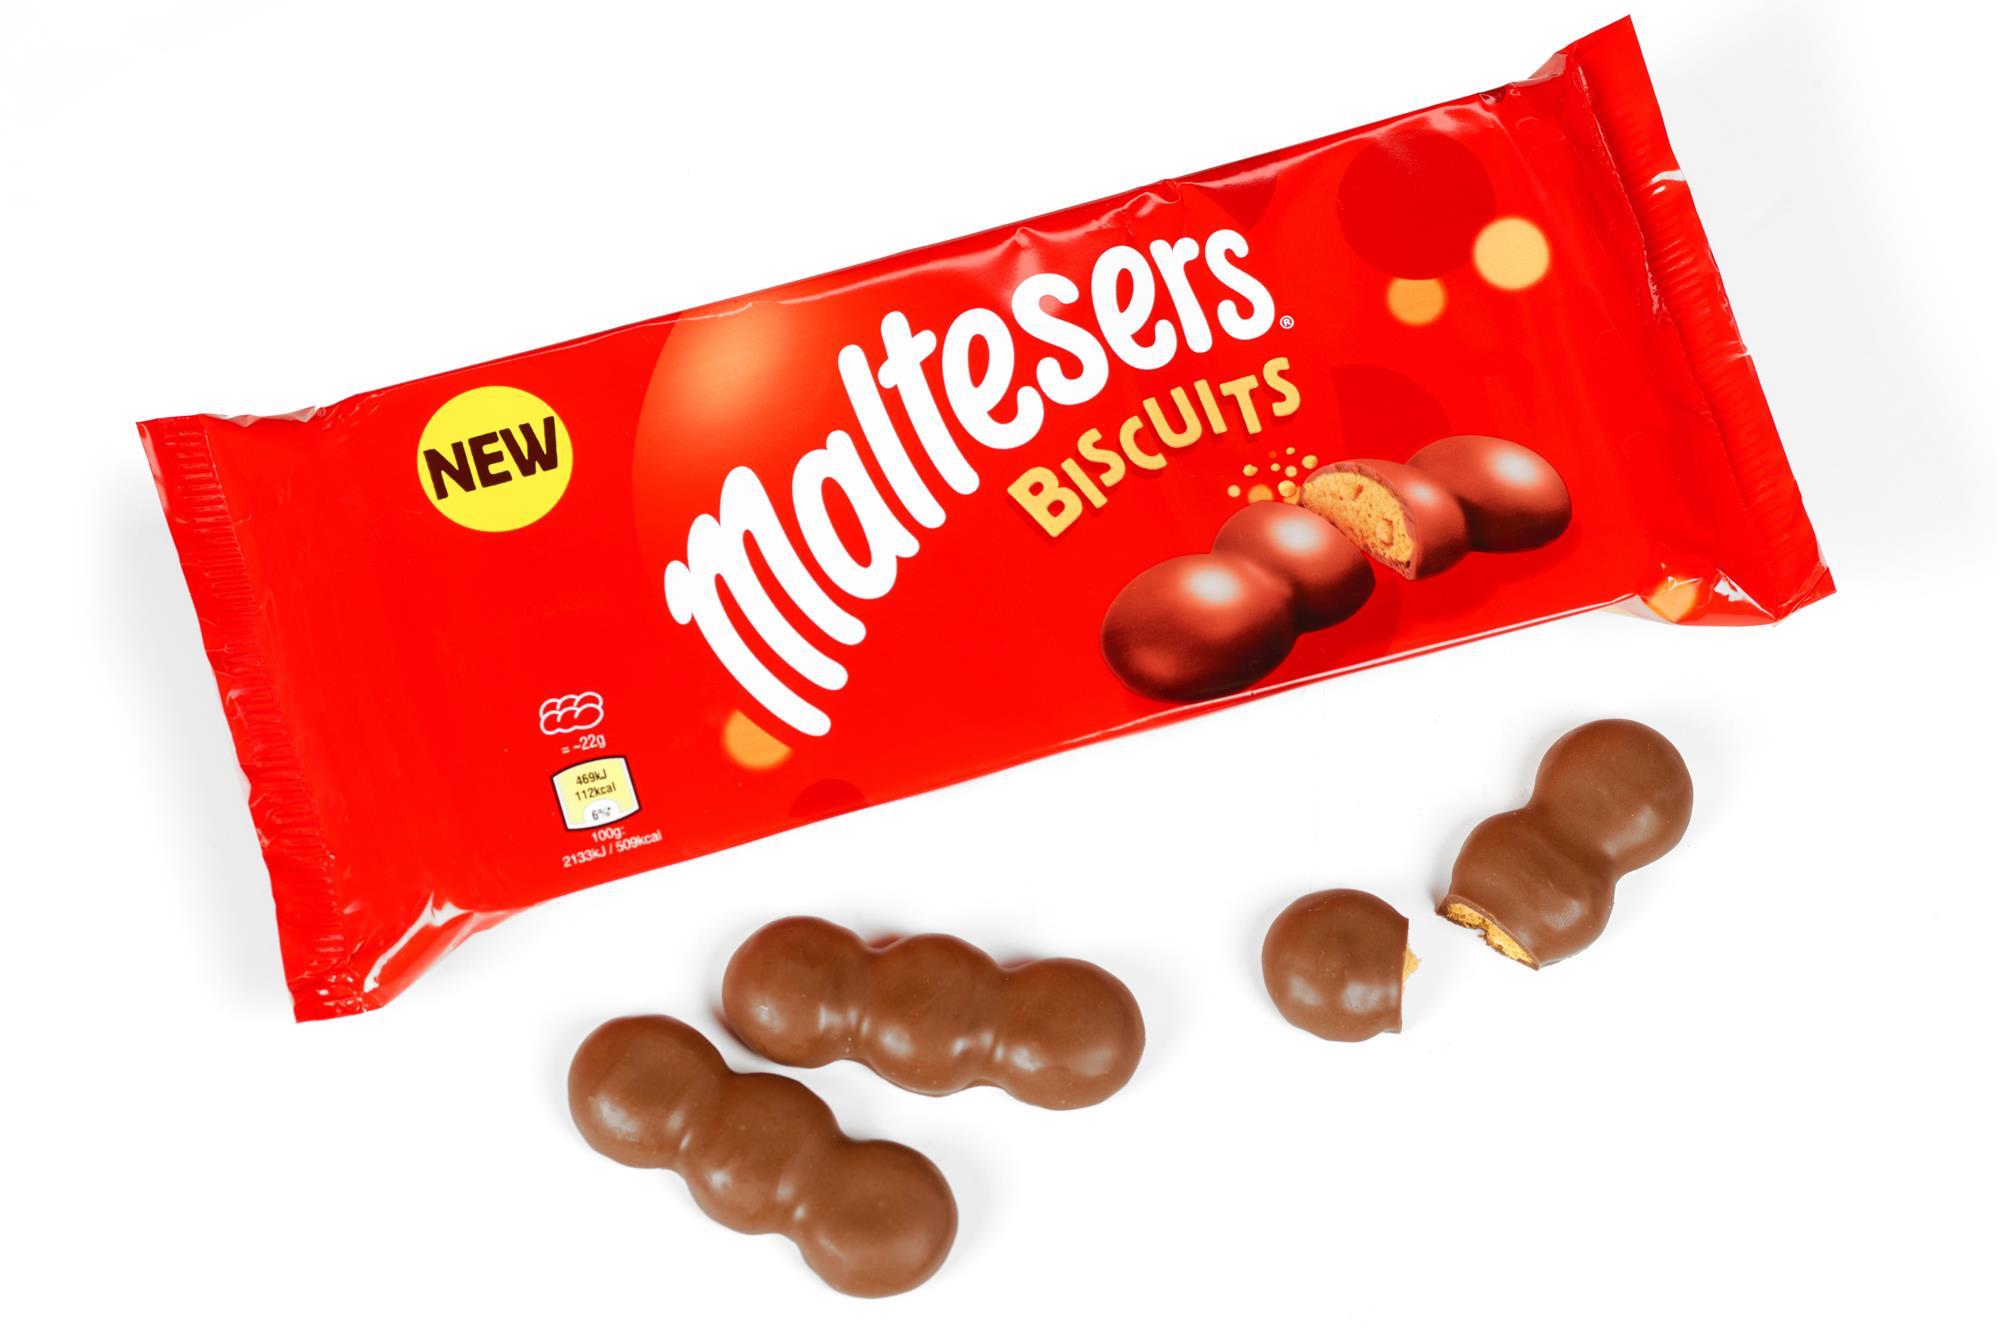 Maltesers breaks into biscuits with latest NPD, News